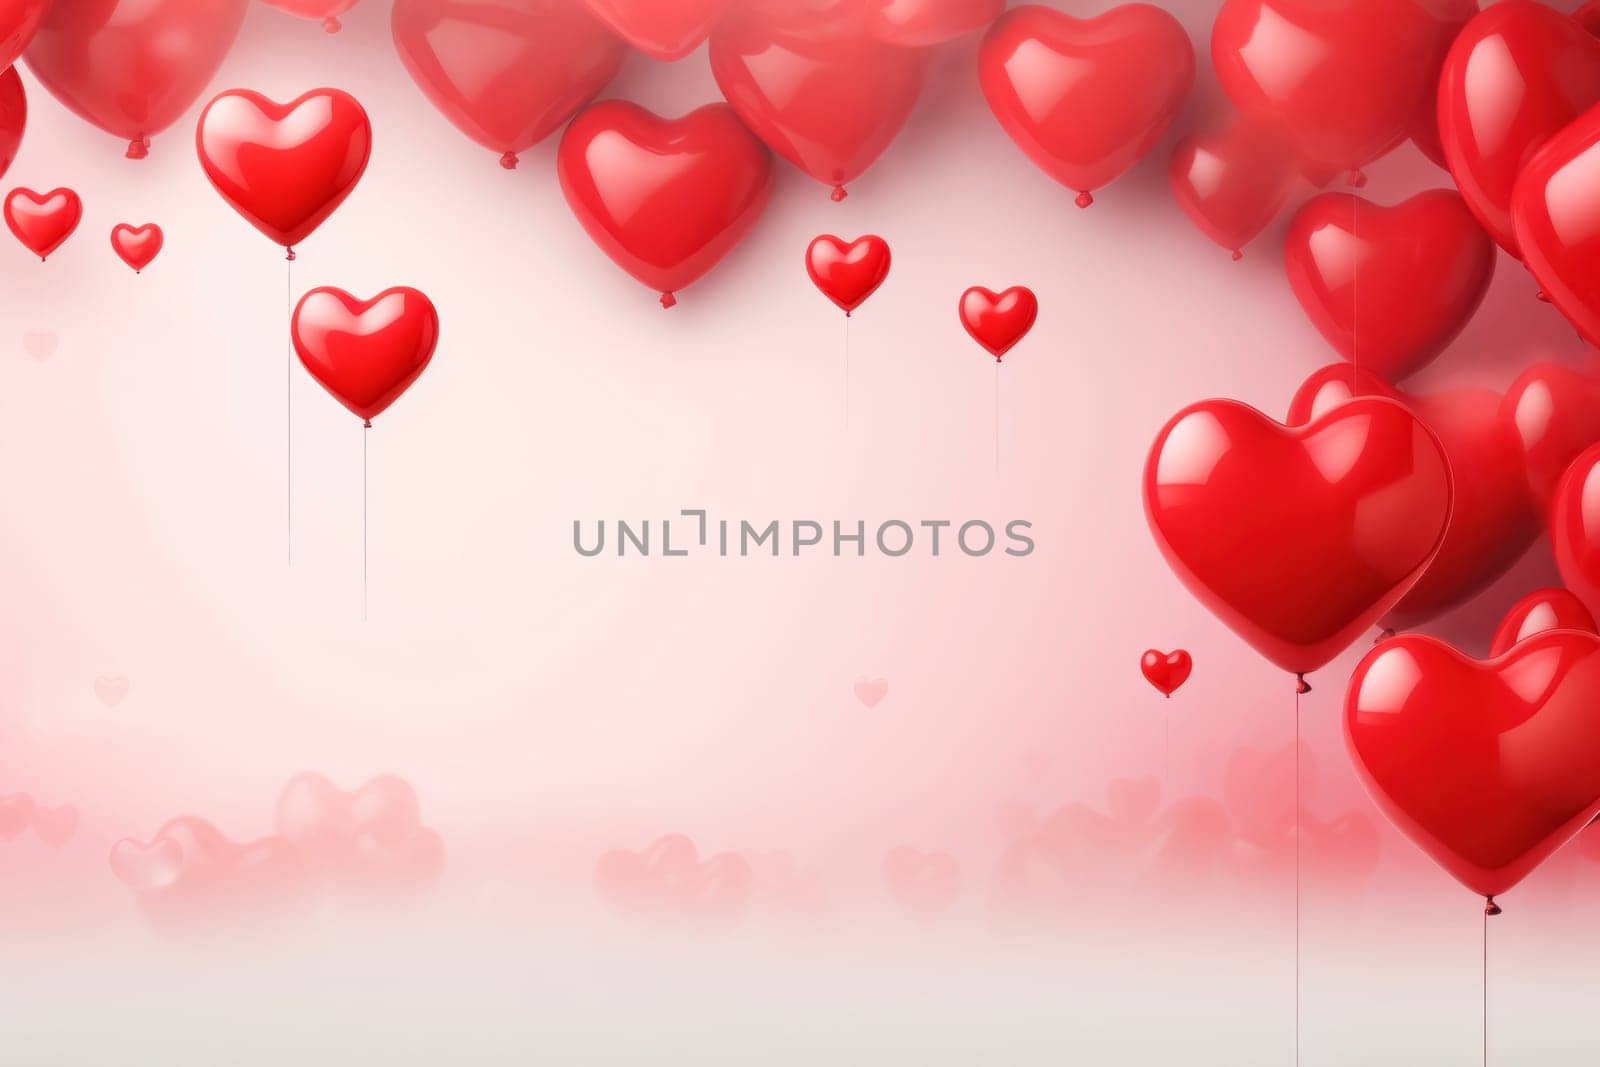 A dreamy array of floating red heart-shaped balloons against a soft pink backdrop, evoking romance and celebration.